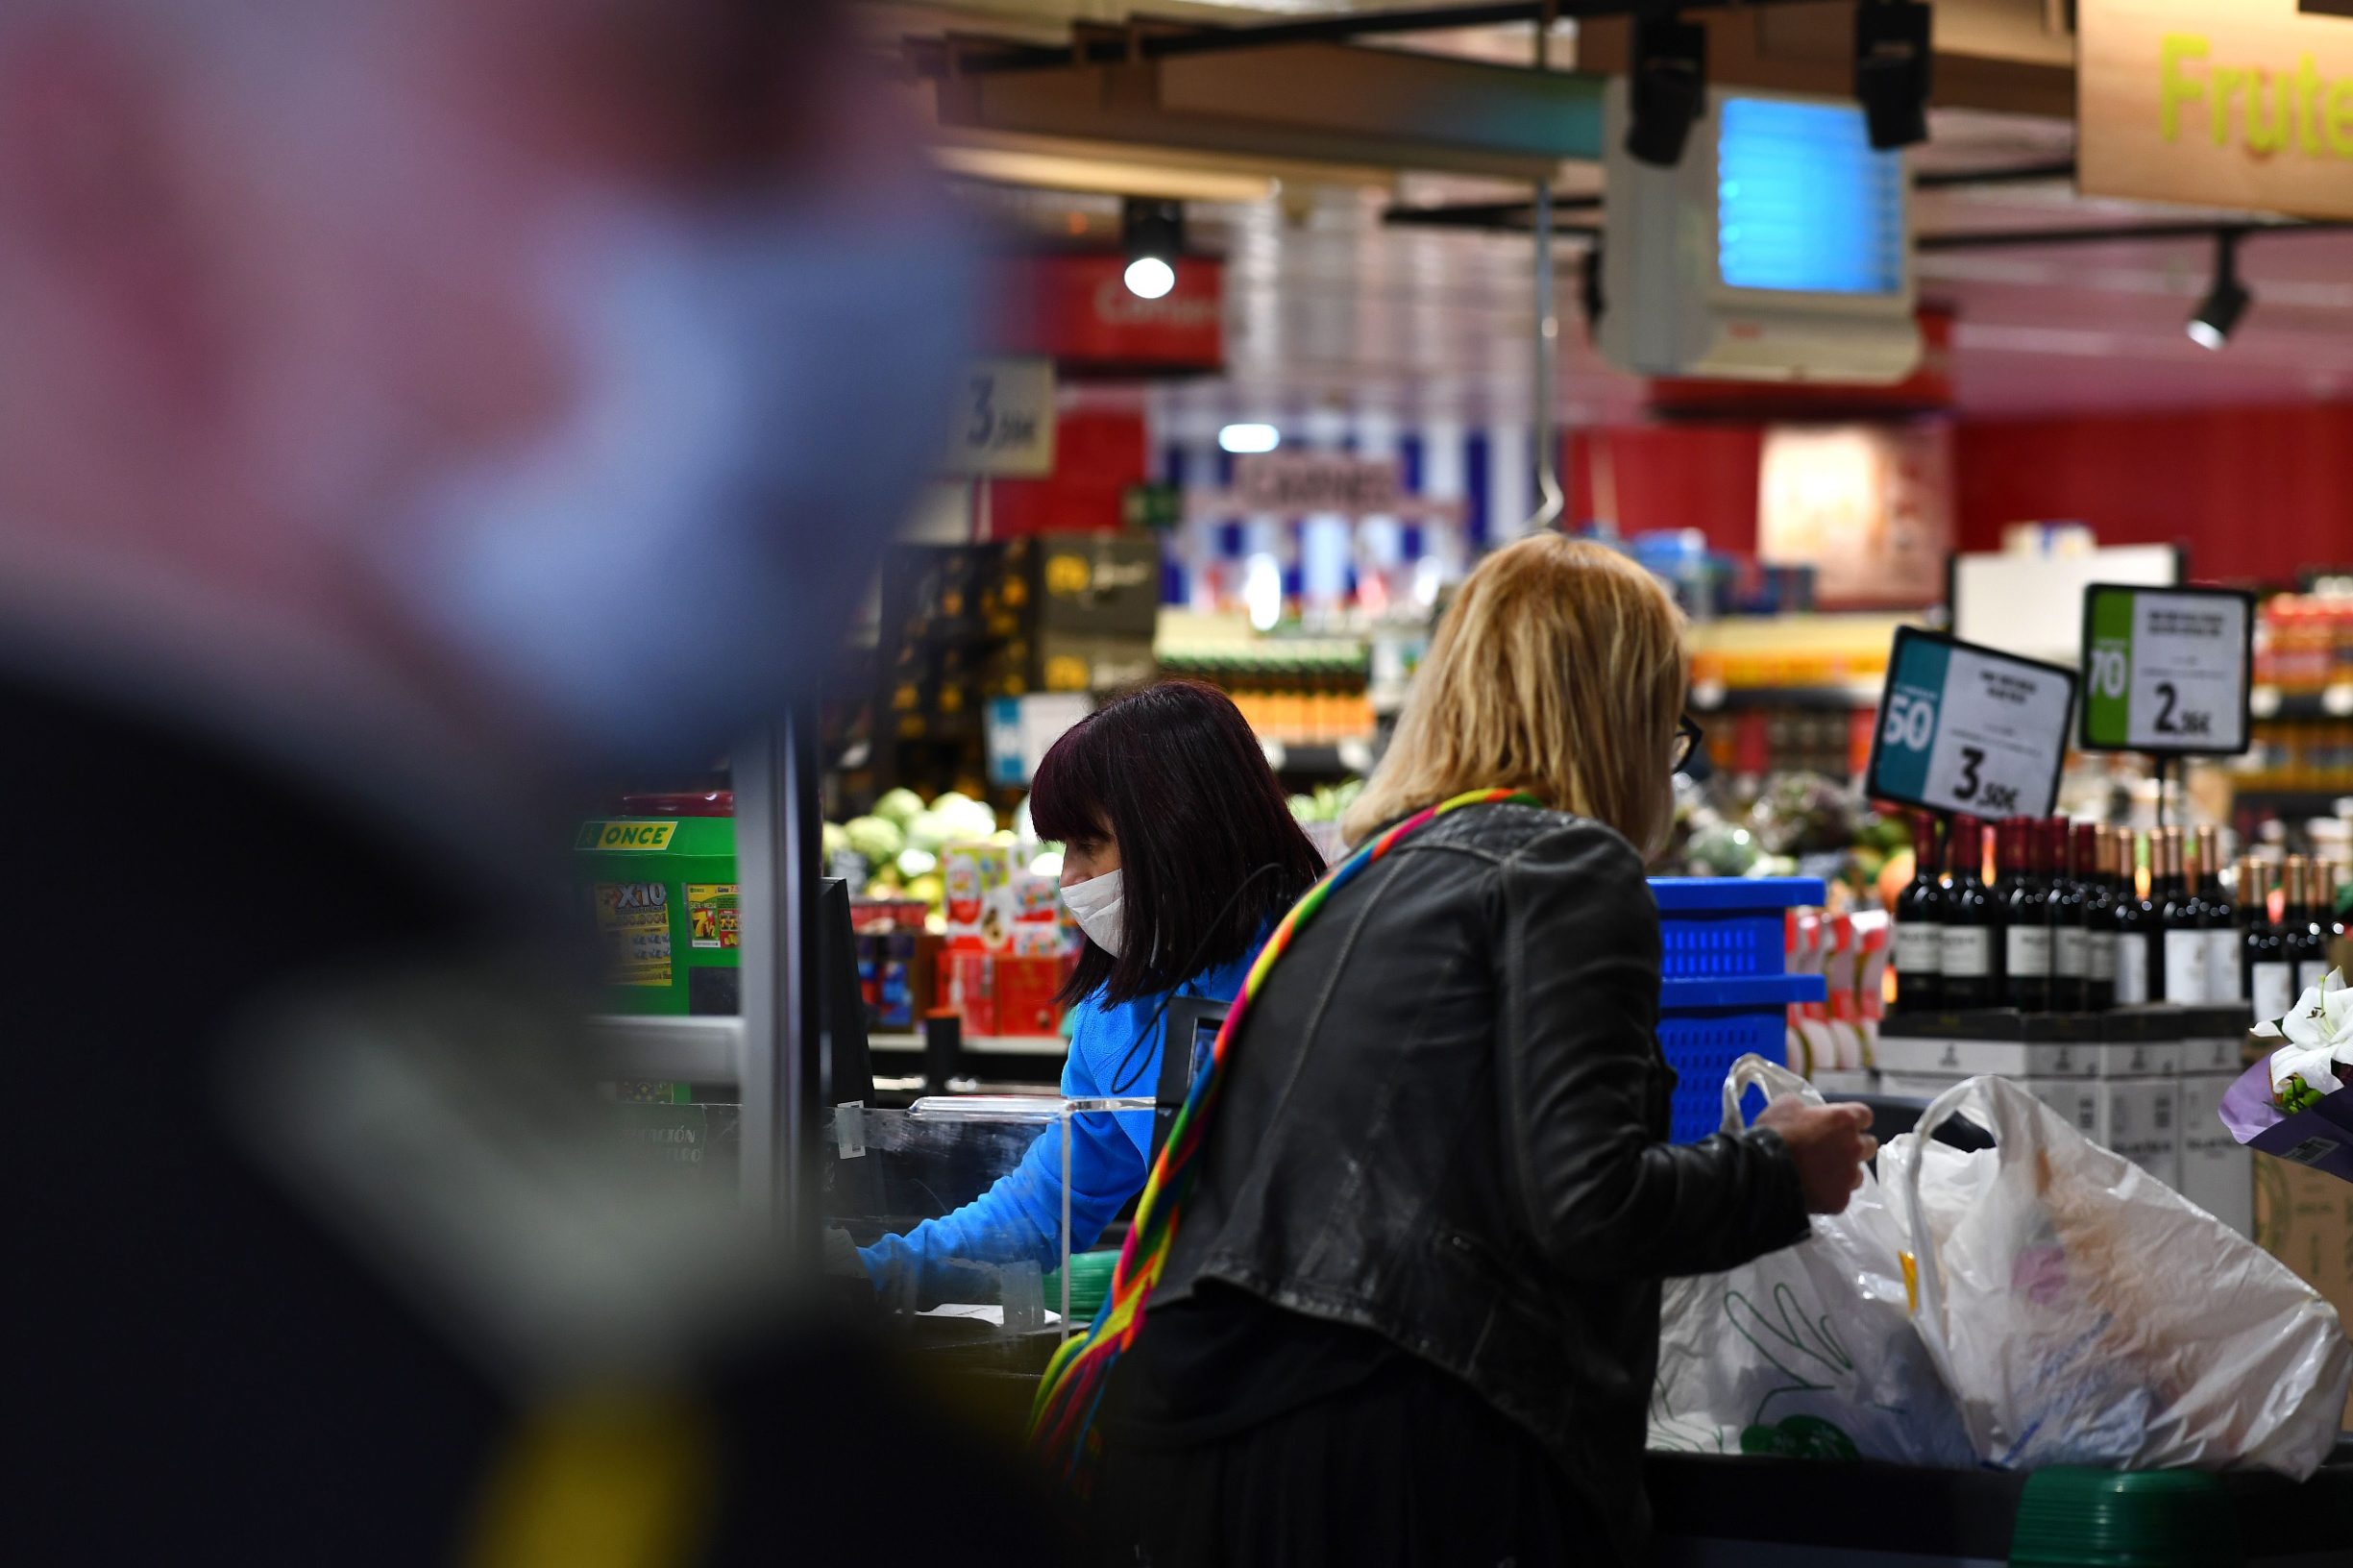 A checker wearing face mask and gloves as a preventive measure works at a supermarket on March 17, 2020 during a lockdown in Madrid as part of the country's fight against the spread of the coronavirus, COVID-19. - The Spanish government will allocate up to 100 billion euros (0 billion) for loan guarantees to businesses to buffer the economy from the damage caused by the coronavirus outbreak, Prime Minister Pedro Sanchez said today. Spain confirmed nearly 2,000 new cases of COVID-19, sending the total spiralling past 11,000, with 491 deaths, the health ministry said. (Photo by GABRIEL BOUYS / AFP)